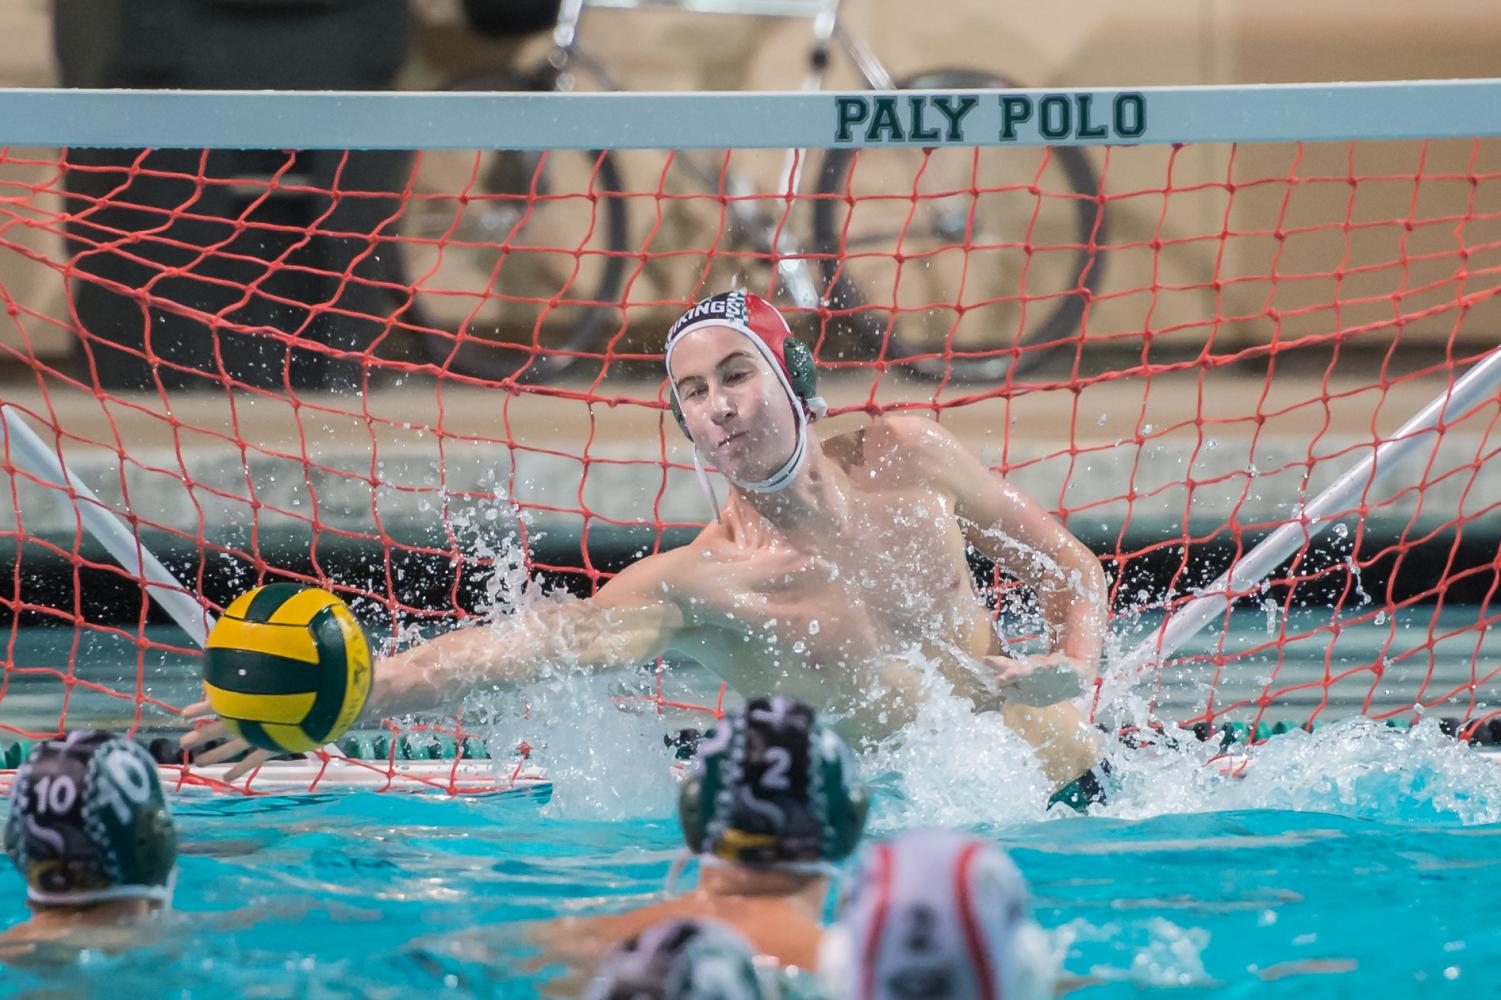 Senior+Ben+Rapaport+will+be+returning+for+his+fourth+season+as+the+varsity+goalie+for+Paly.+%0D%0A